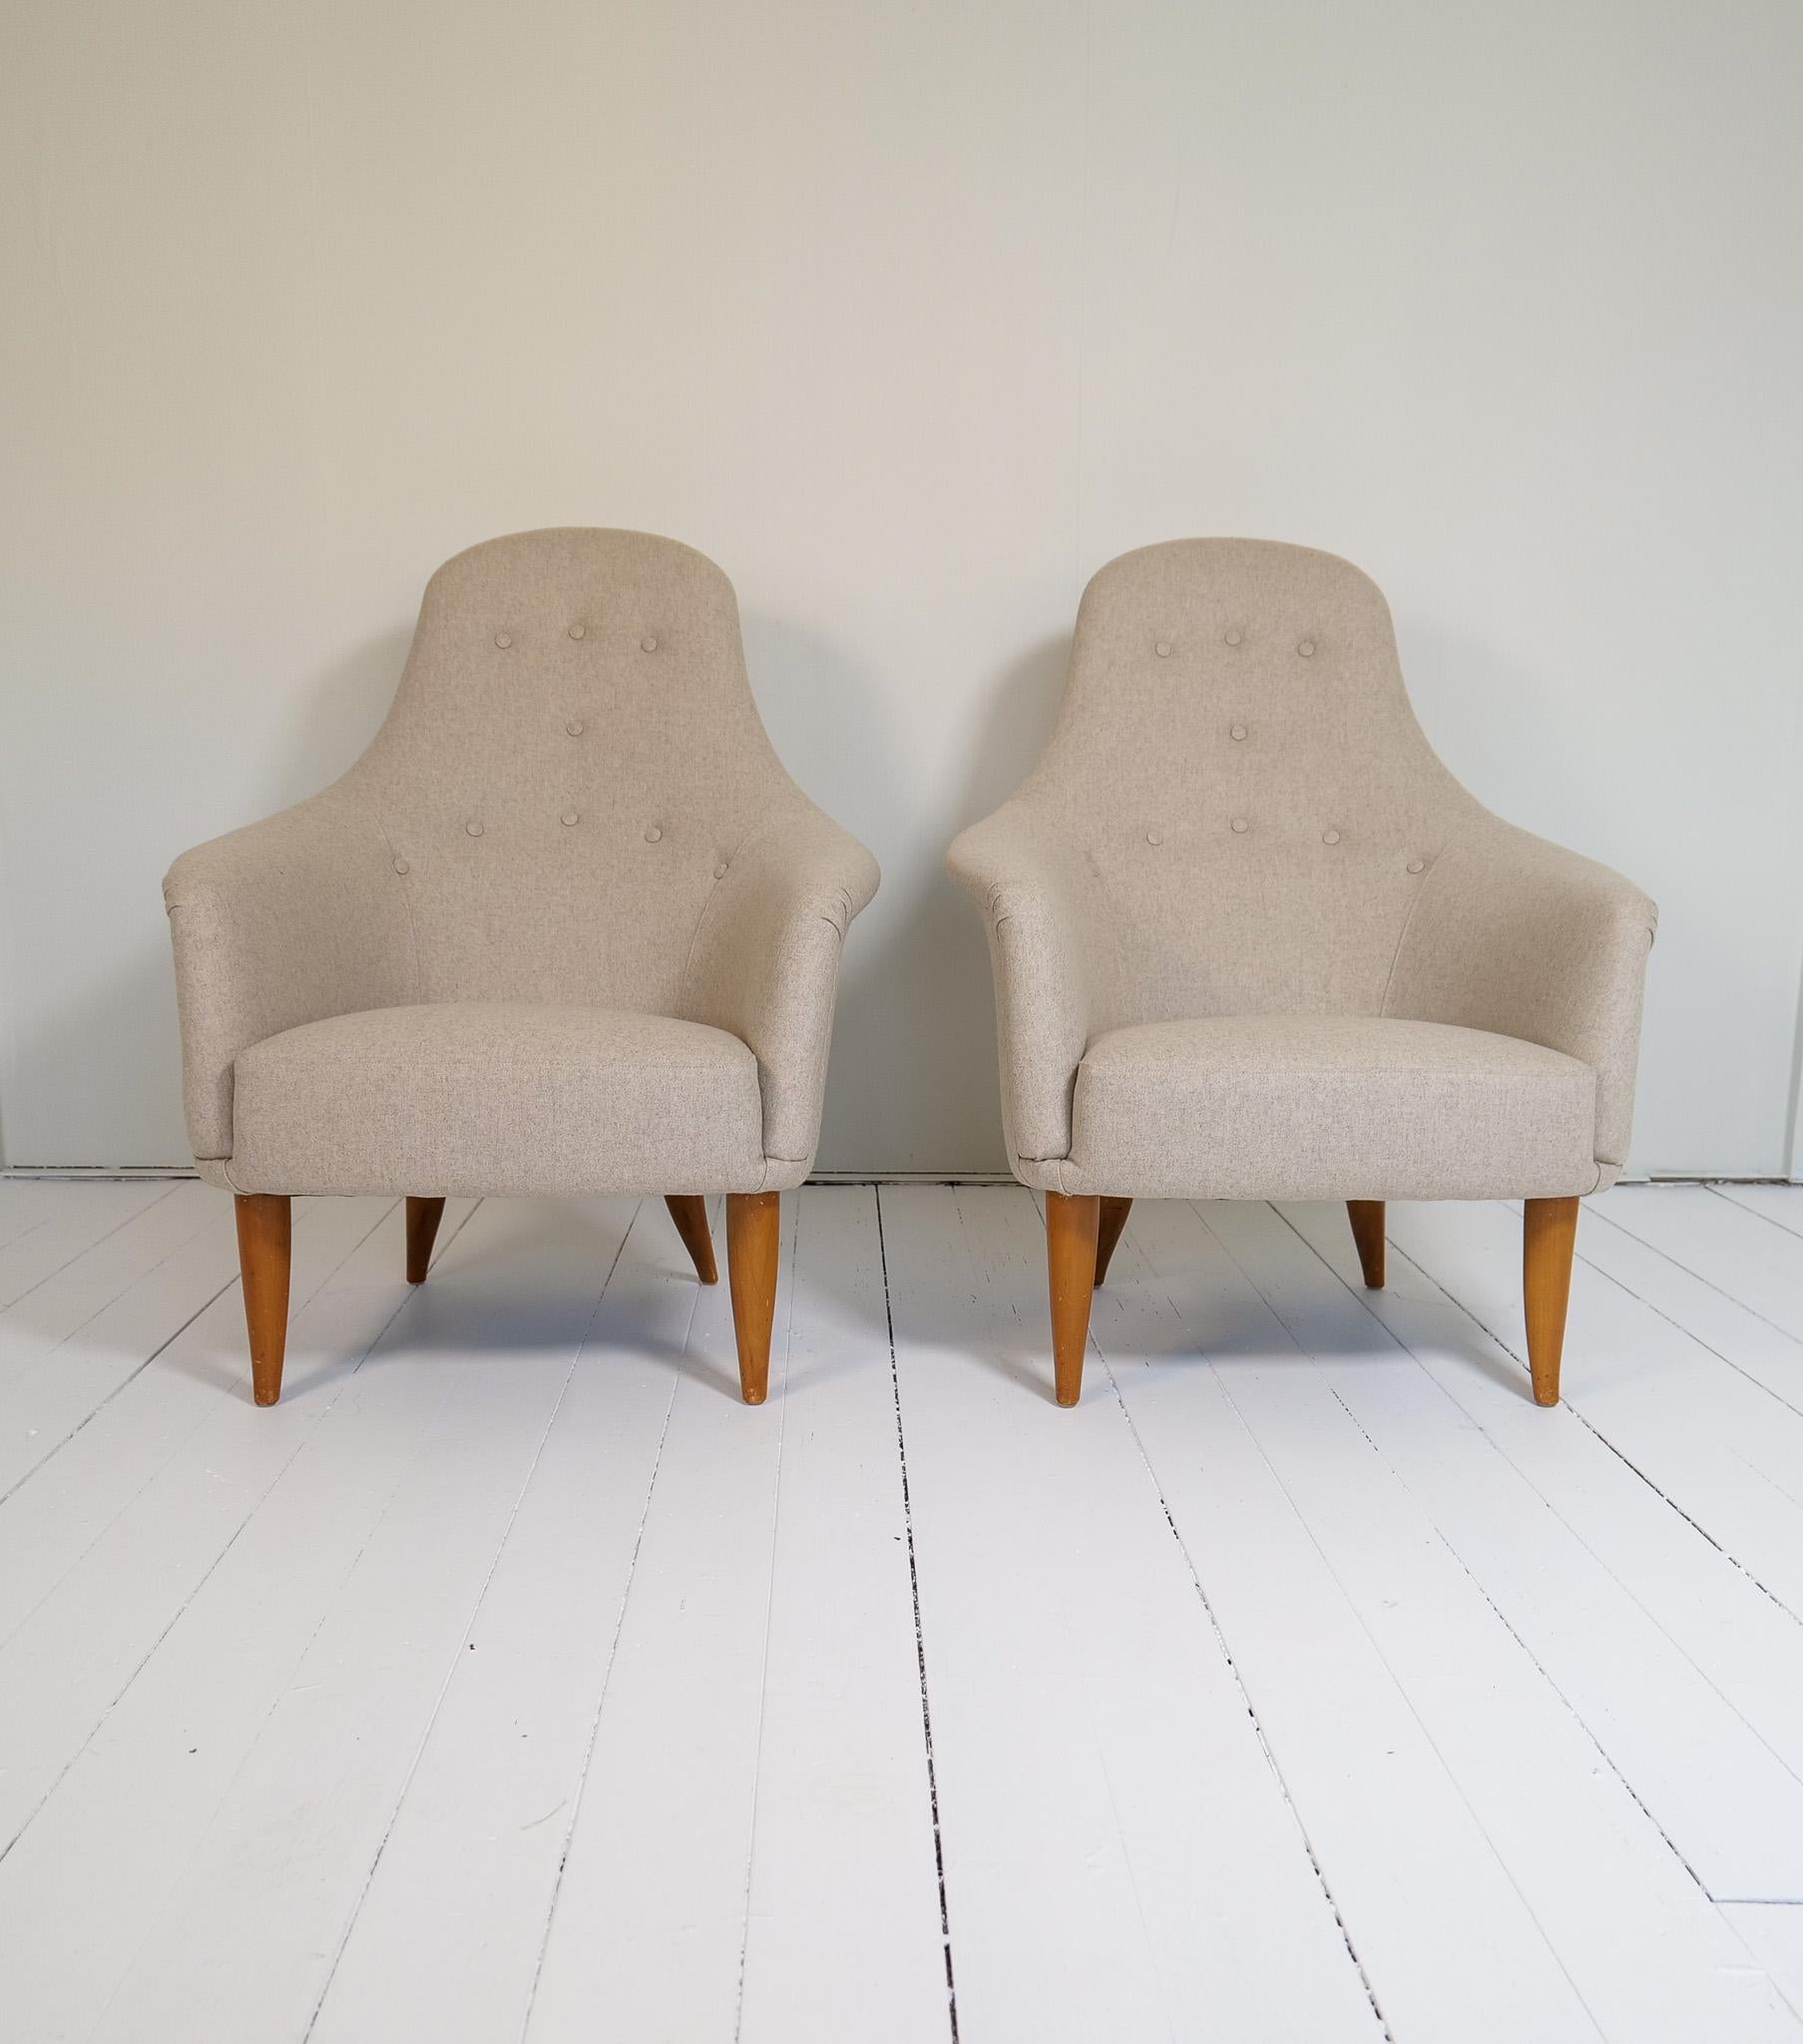 Midcentury Modern Big Adam Lounge Chairs NK, Sweden, 1950s In Good Condition For Sale In Hillringsberg, SE